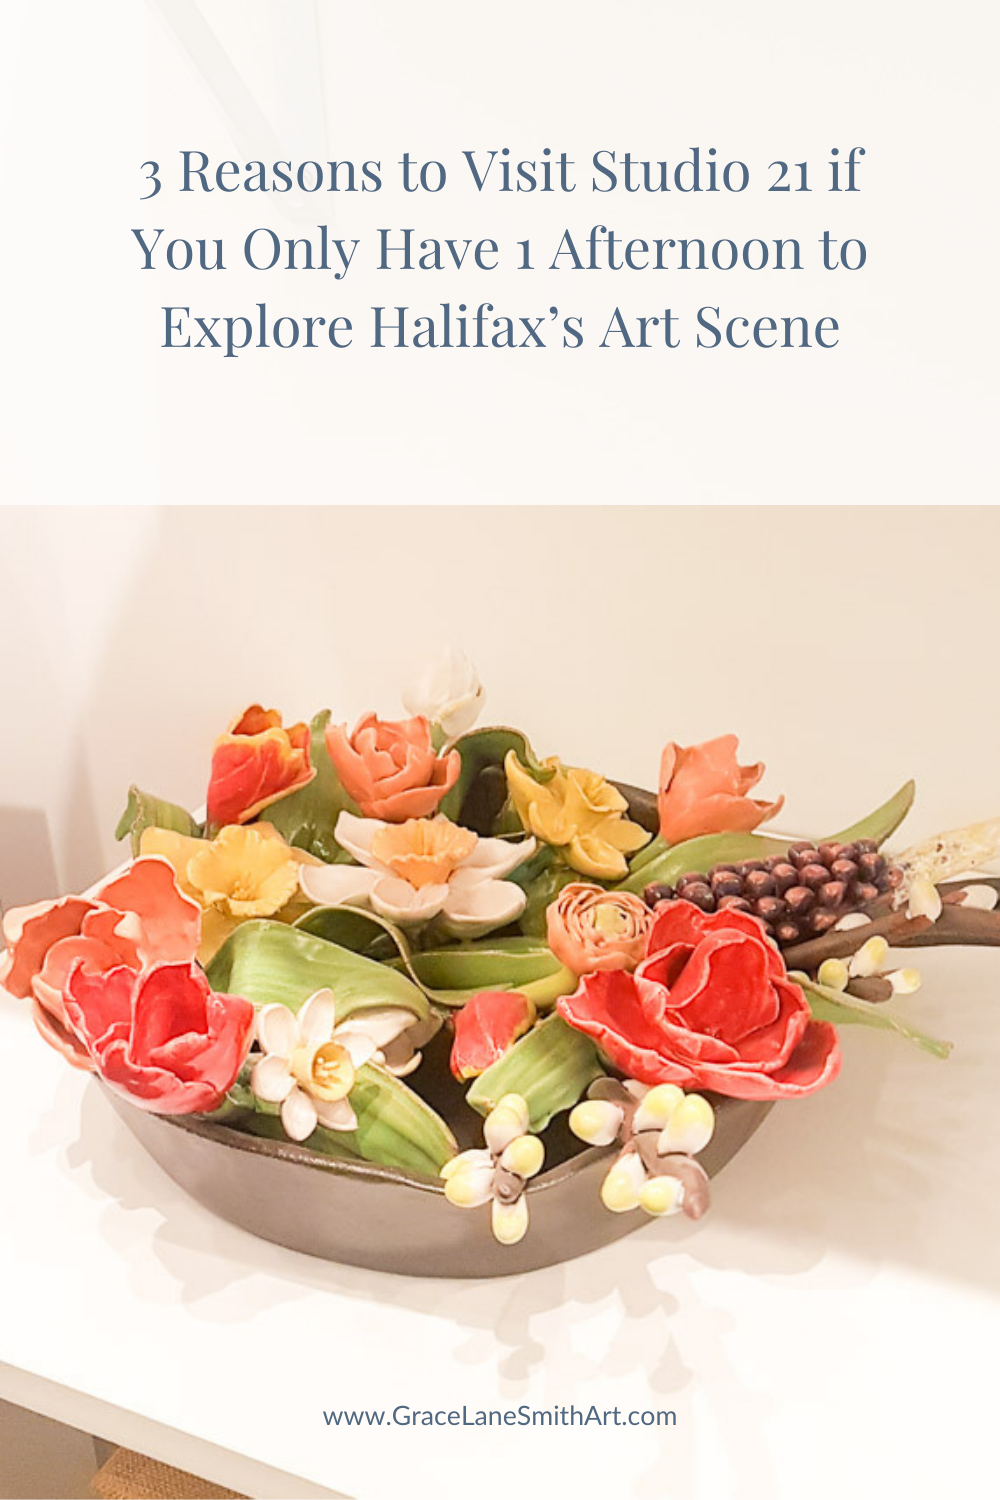 3-reasons-to-visit-studio-21-if-you-only-have-1-afternoon-to-explore-halifax-art-scene-grace-lane-smith-blog-pinterest-graphic